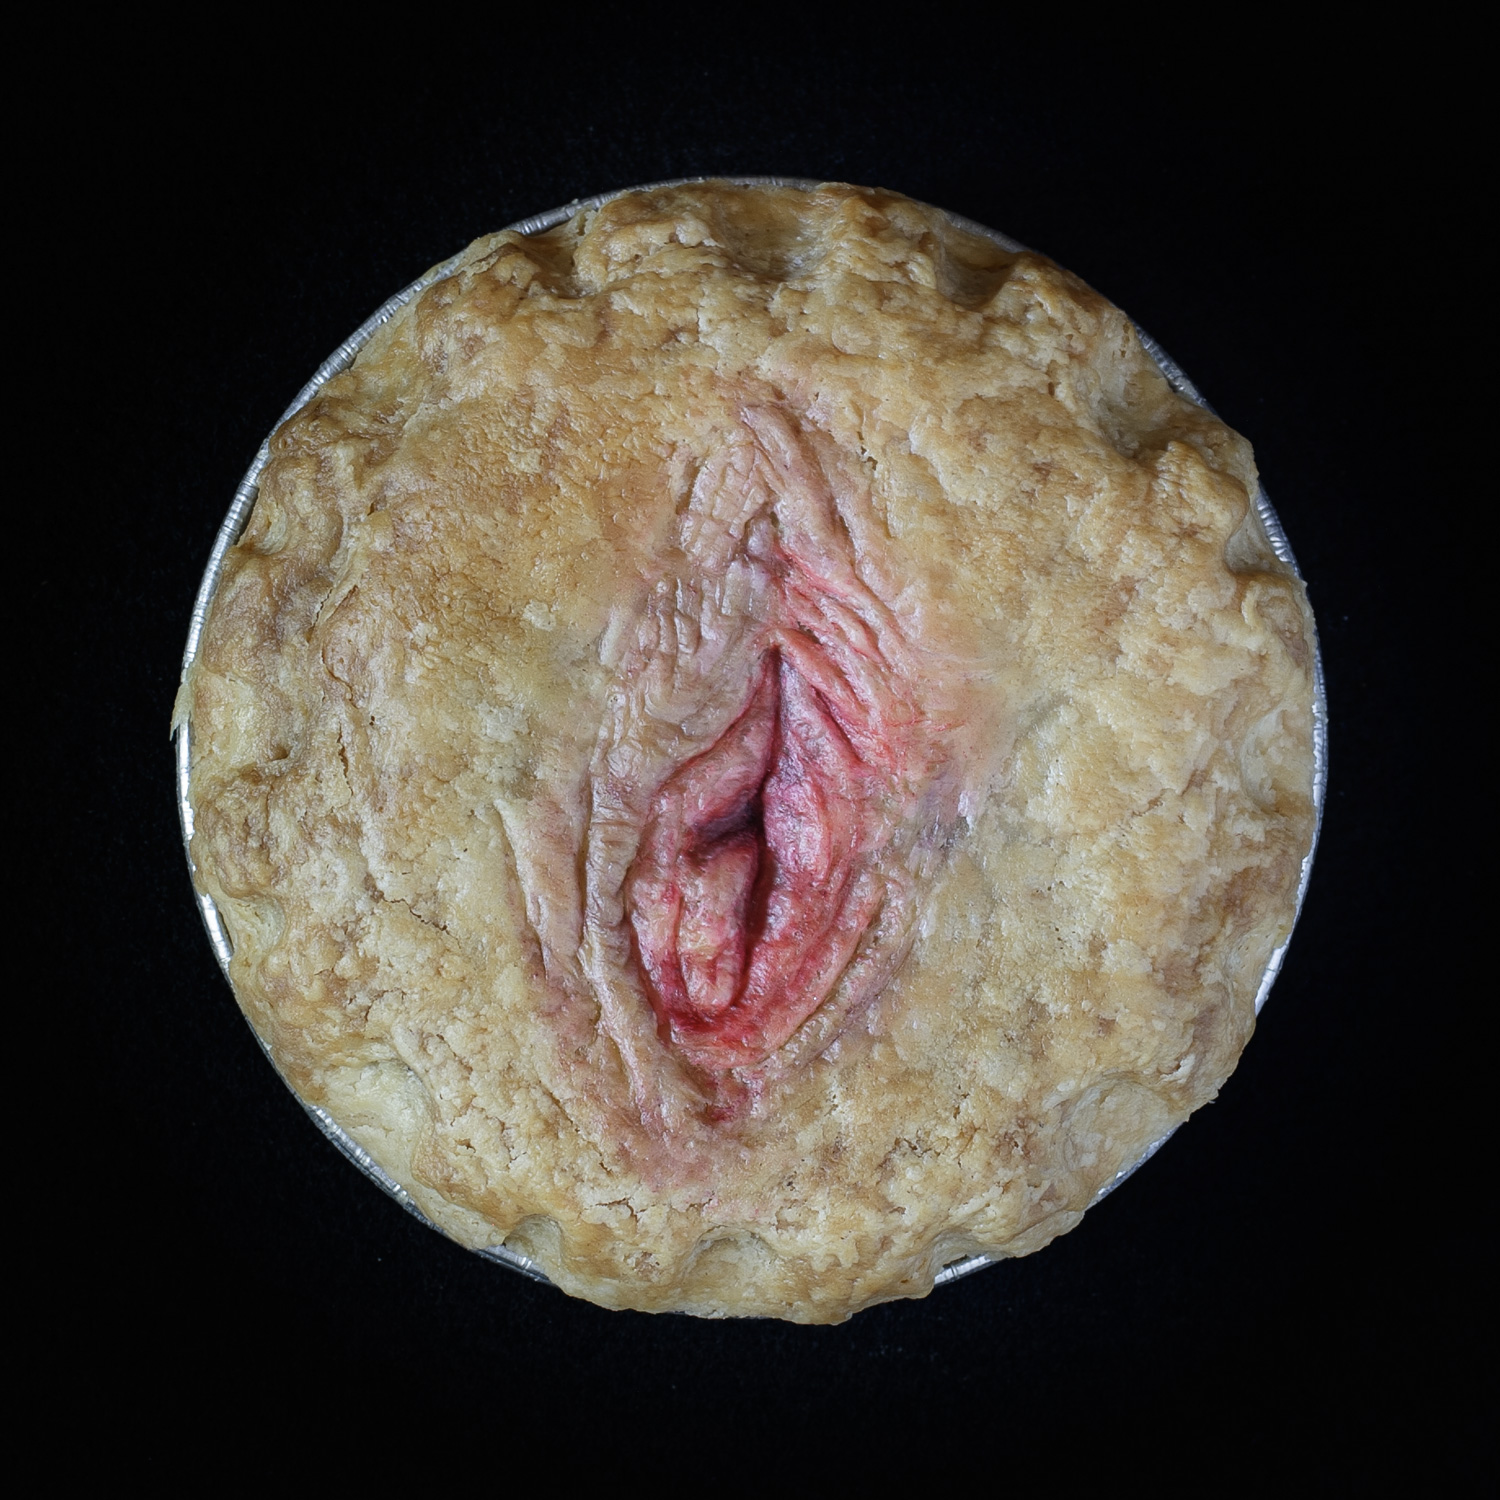 Baked vulva pie on a black background. The pie art features a realistic vulva painted with edible paint.